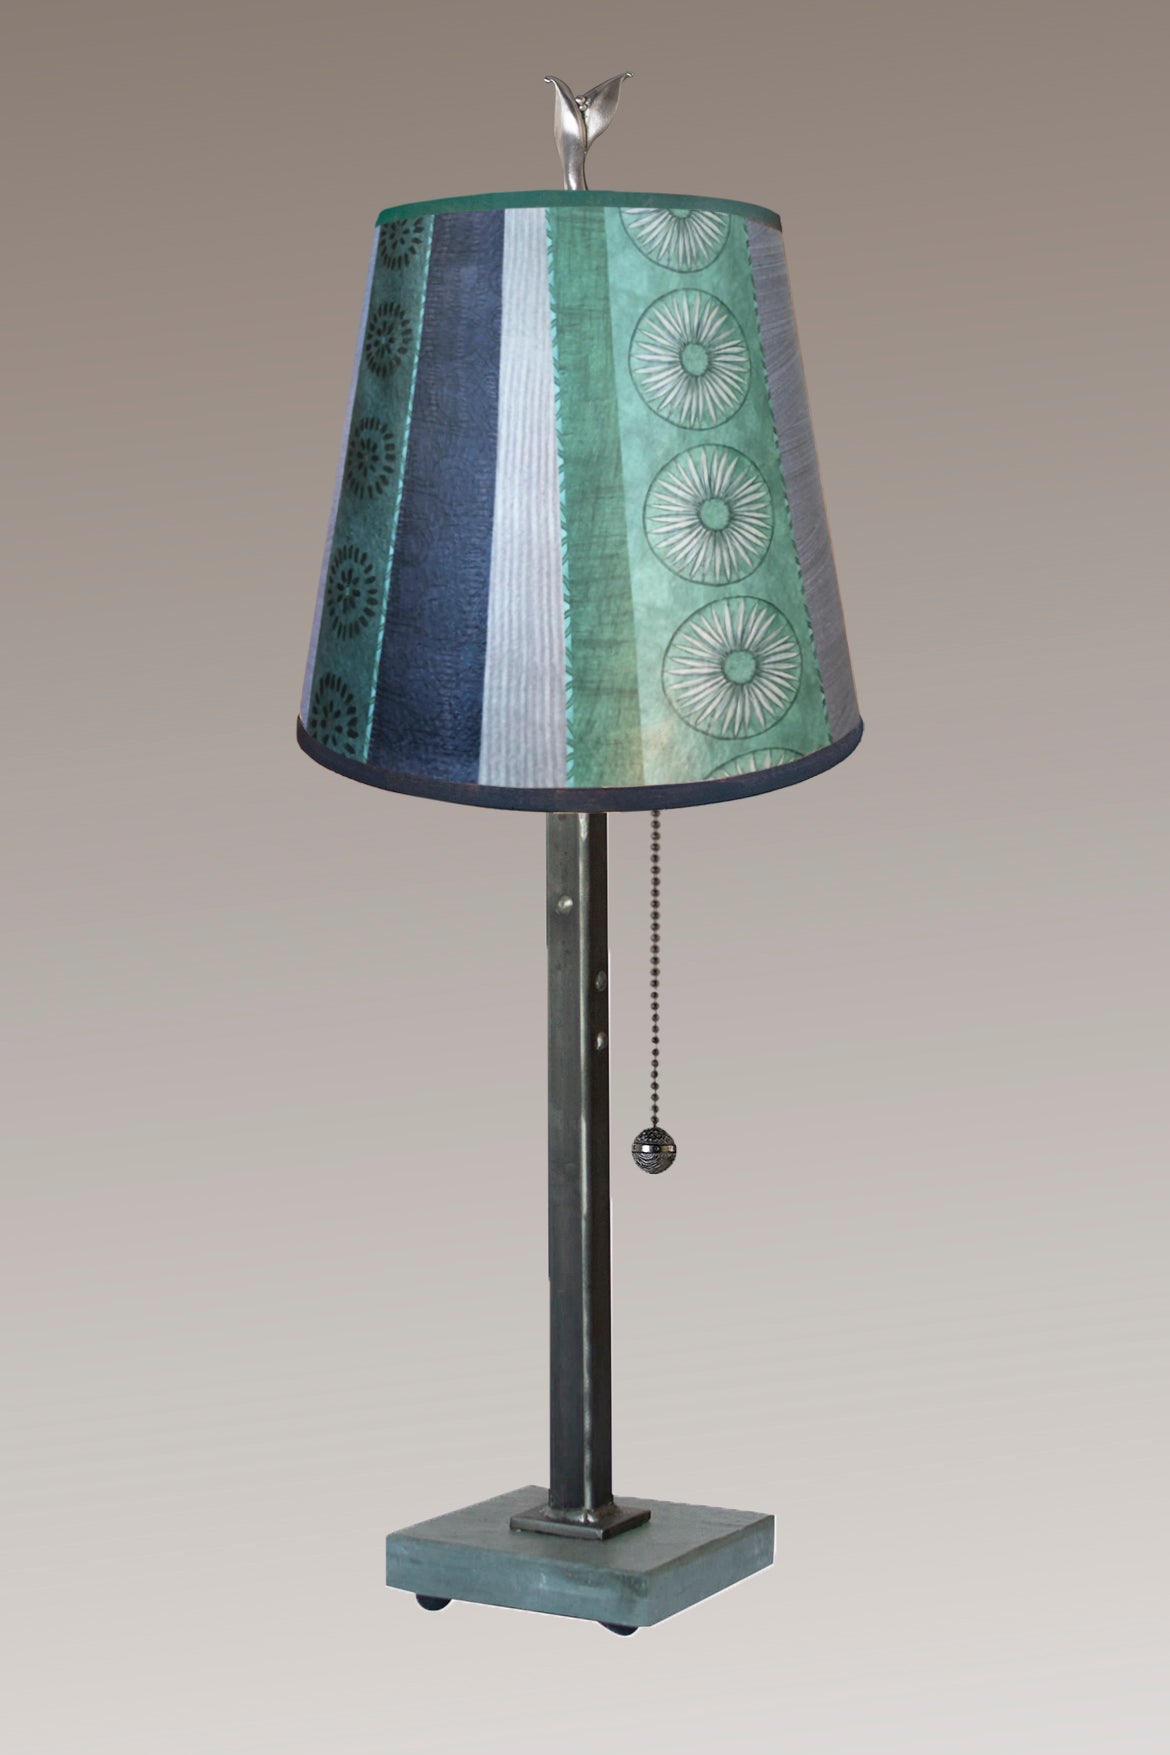 Janna Ugone & Co Table Lamps Steel Table Lamp with Small Drum Shade in Serape Waters